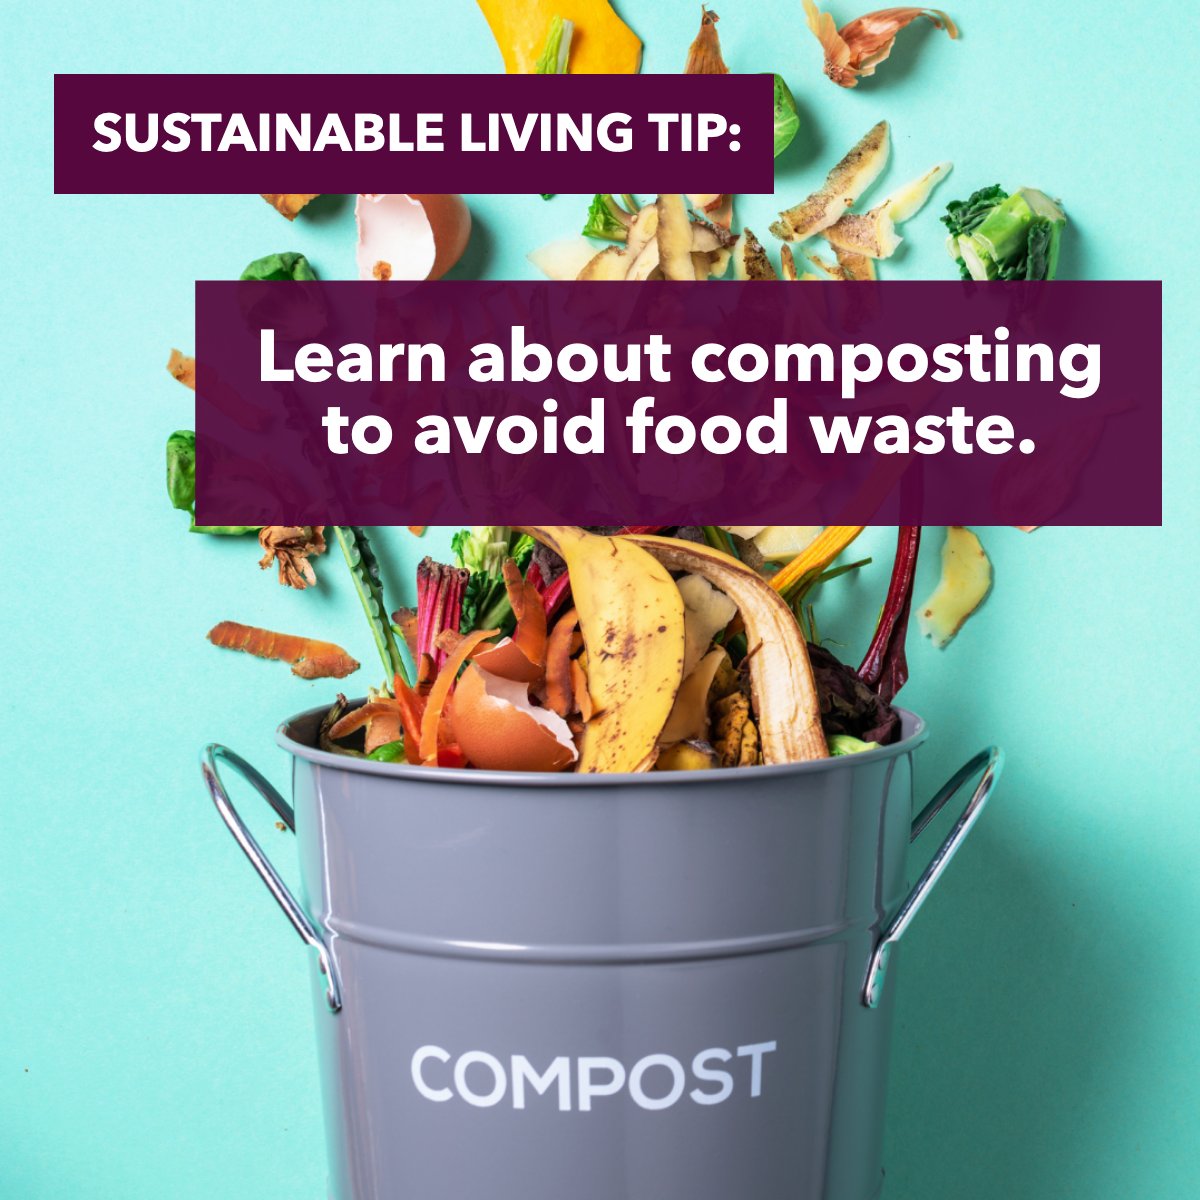 Have you tried composting? Tell me your experience in the comments! 💭

#sustainablelifestyle #sustainable #sustainablity #composting
 #MyrtleBeach #SCRealEstate #Beachliving #BRGRealEstate #AndreaWhiteRealtor #SouthCarolinaHome #MovetoMyrtleBeach #BeachLifeSC